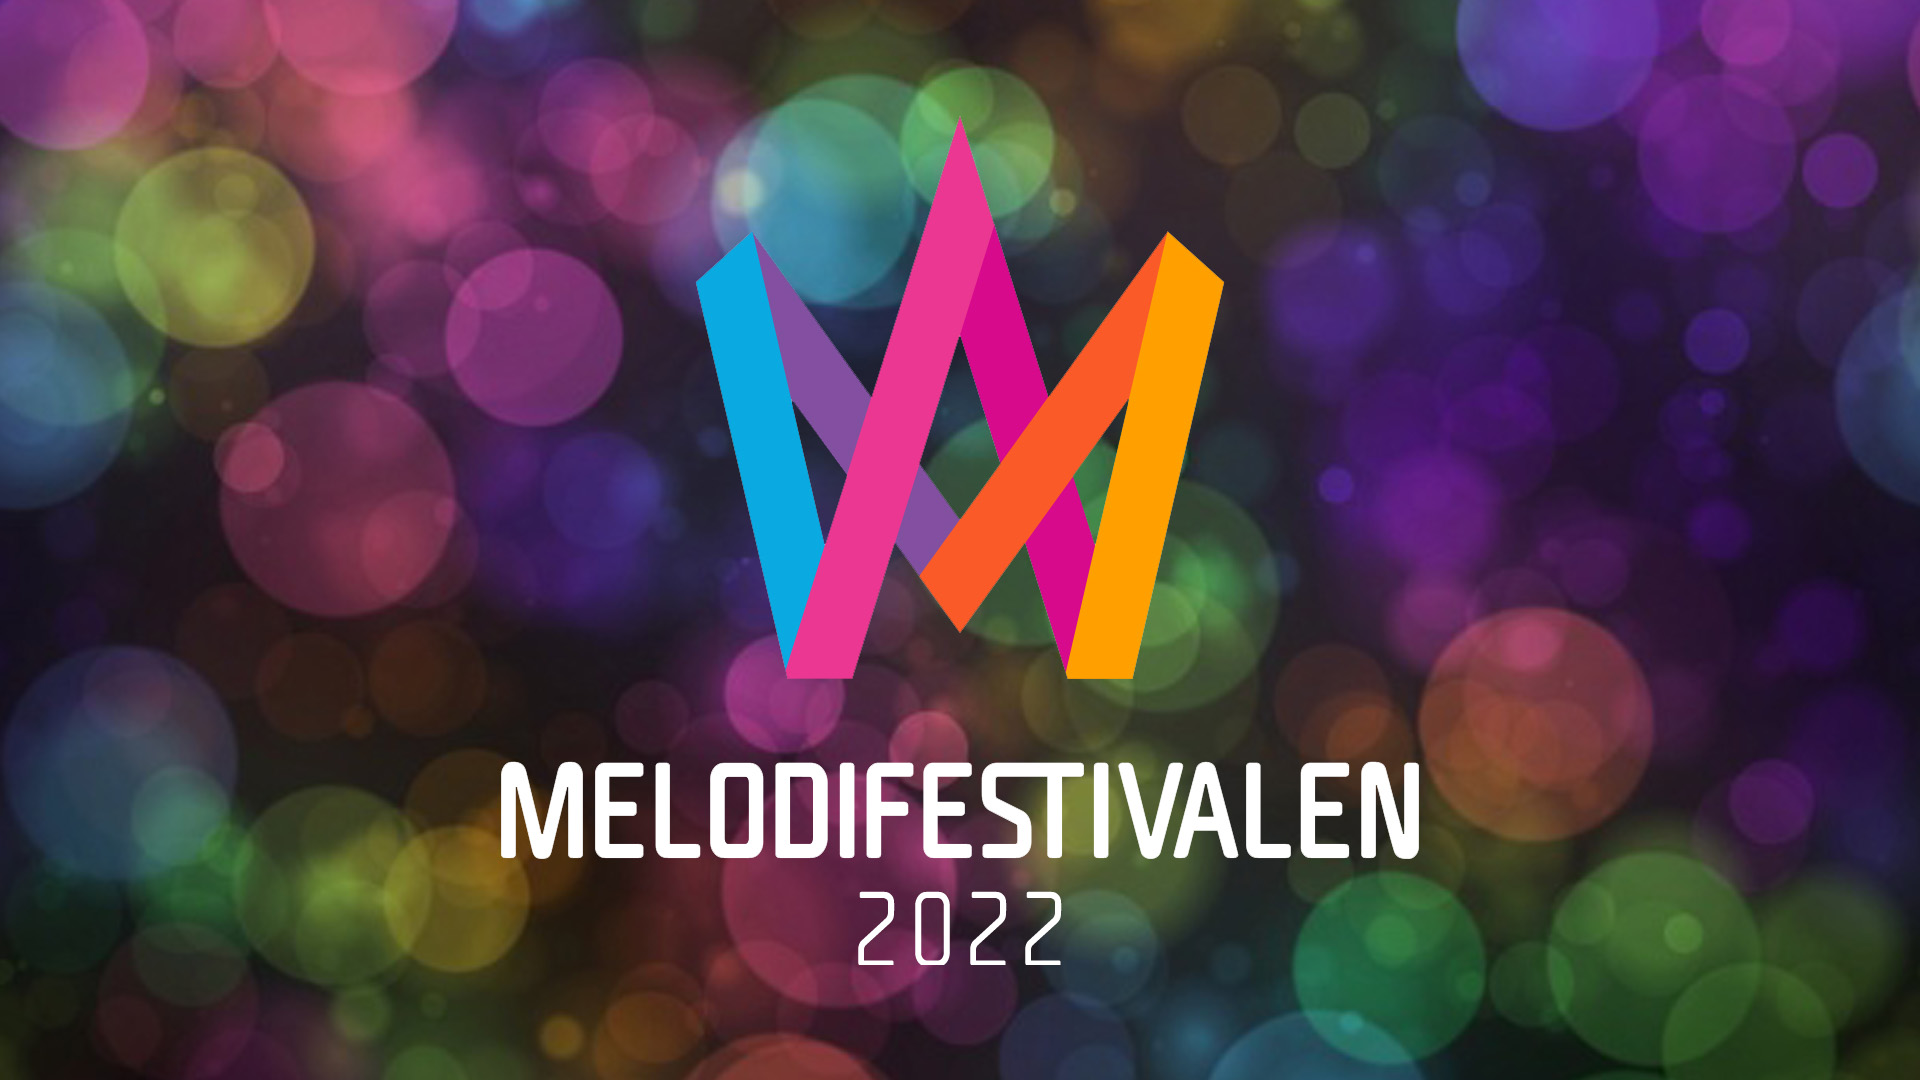 Sweden: Melodifestivalen’s tour is canceled – All shows to take place in Stockholm